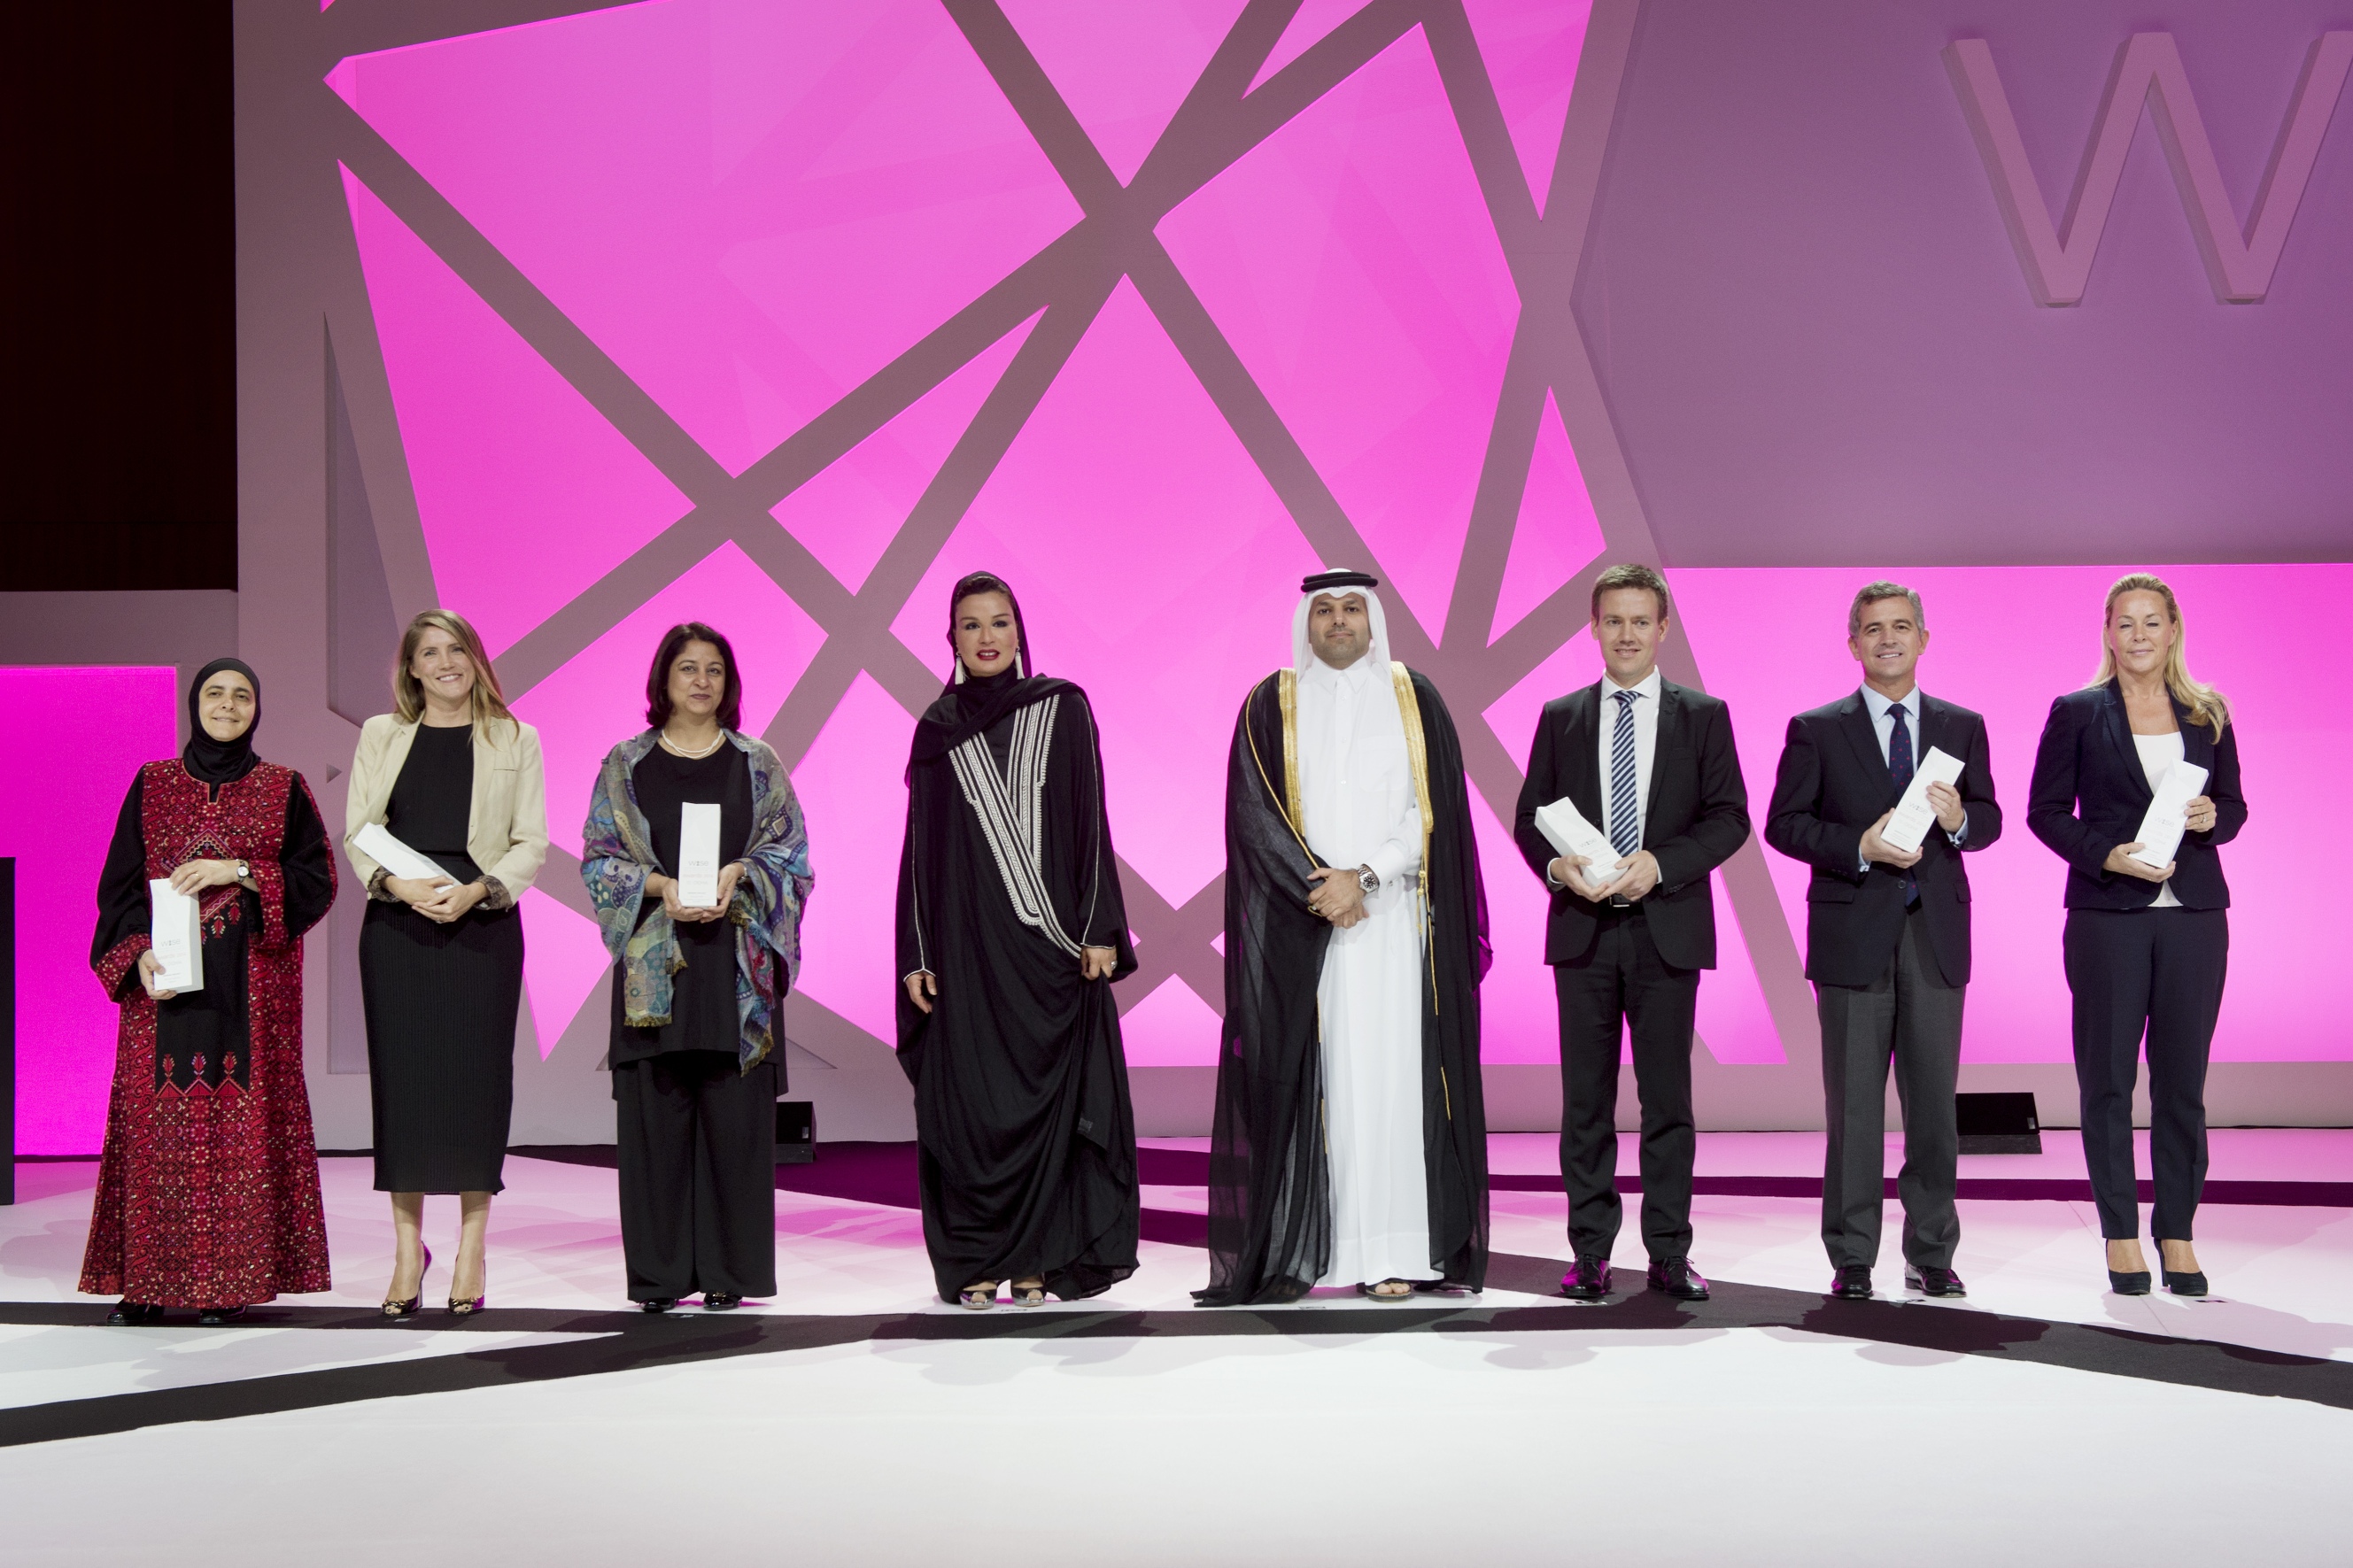 Her Highness Sheikha Moza bint Nasser at the World Innovation Summit for Education (WISE) 2014 gala dinner with Chairman of WISE, His Excellency Dr. Sheikh Abdullah bin Ali Al-Thani, and the six award-winners.